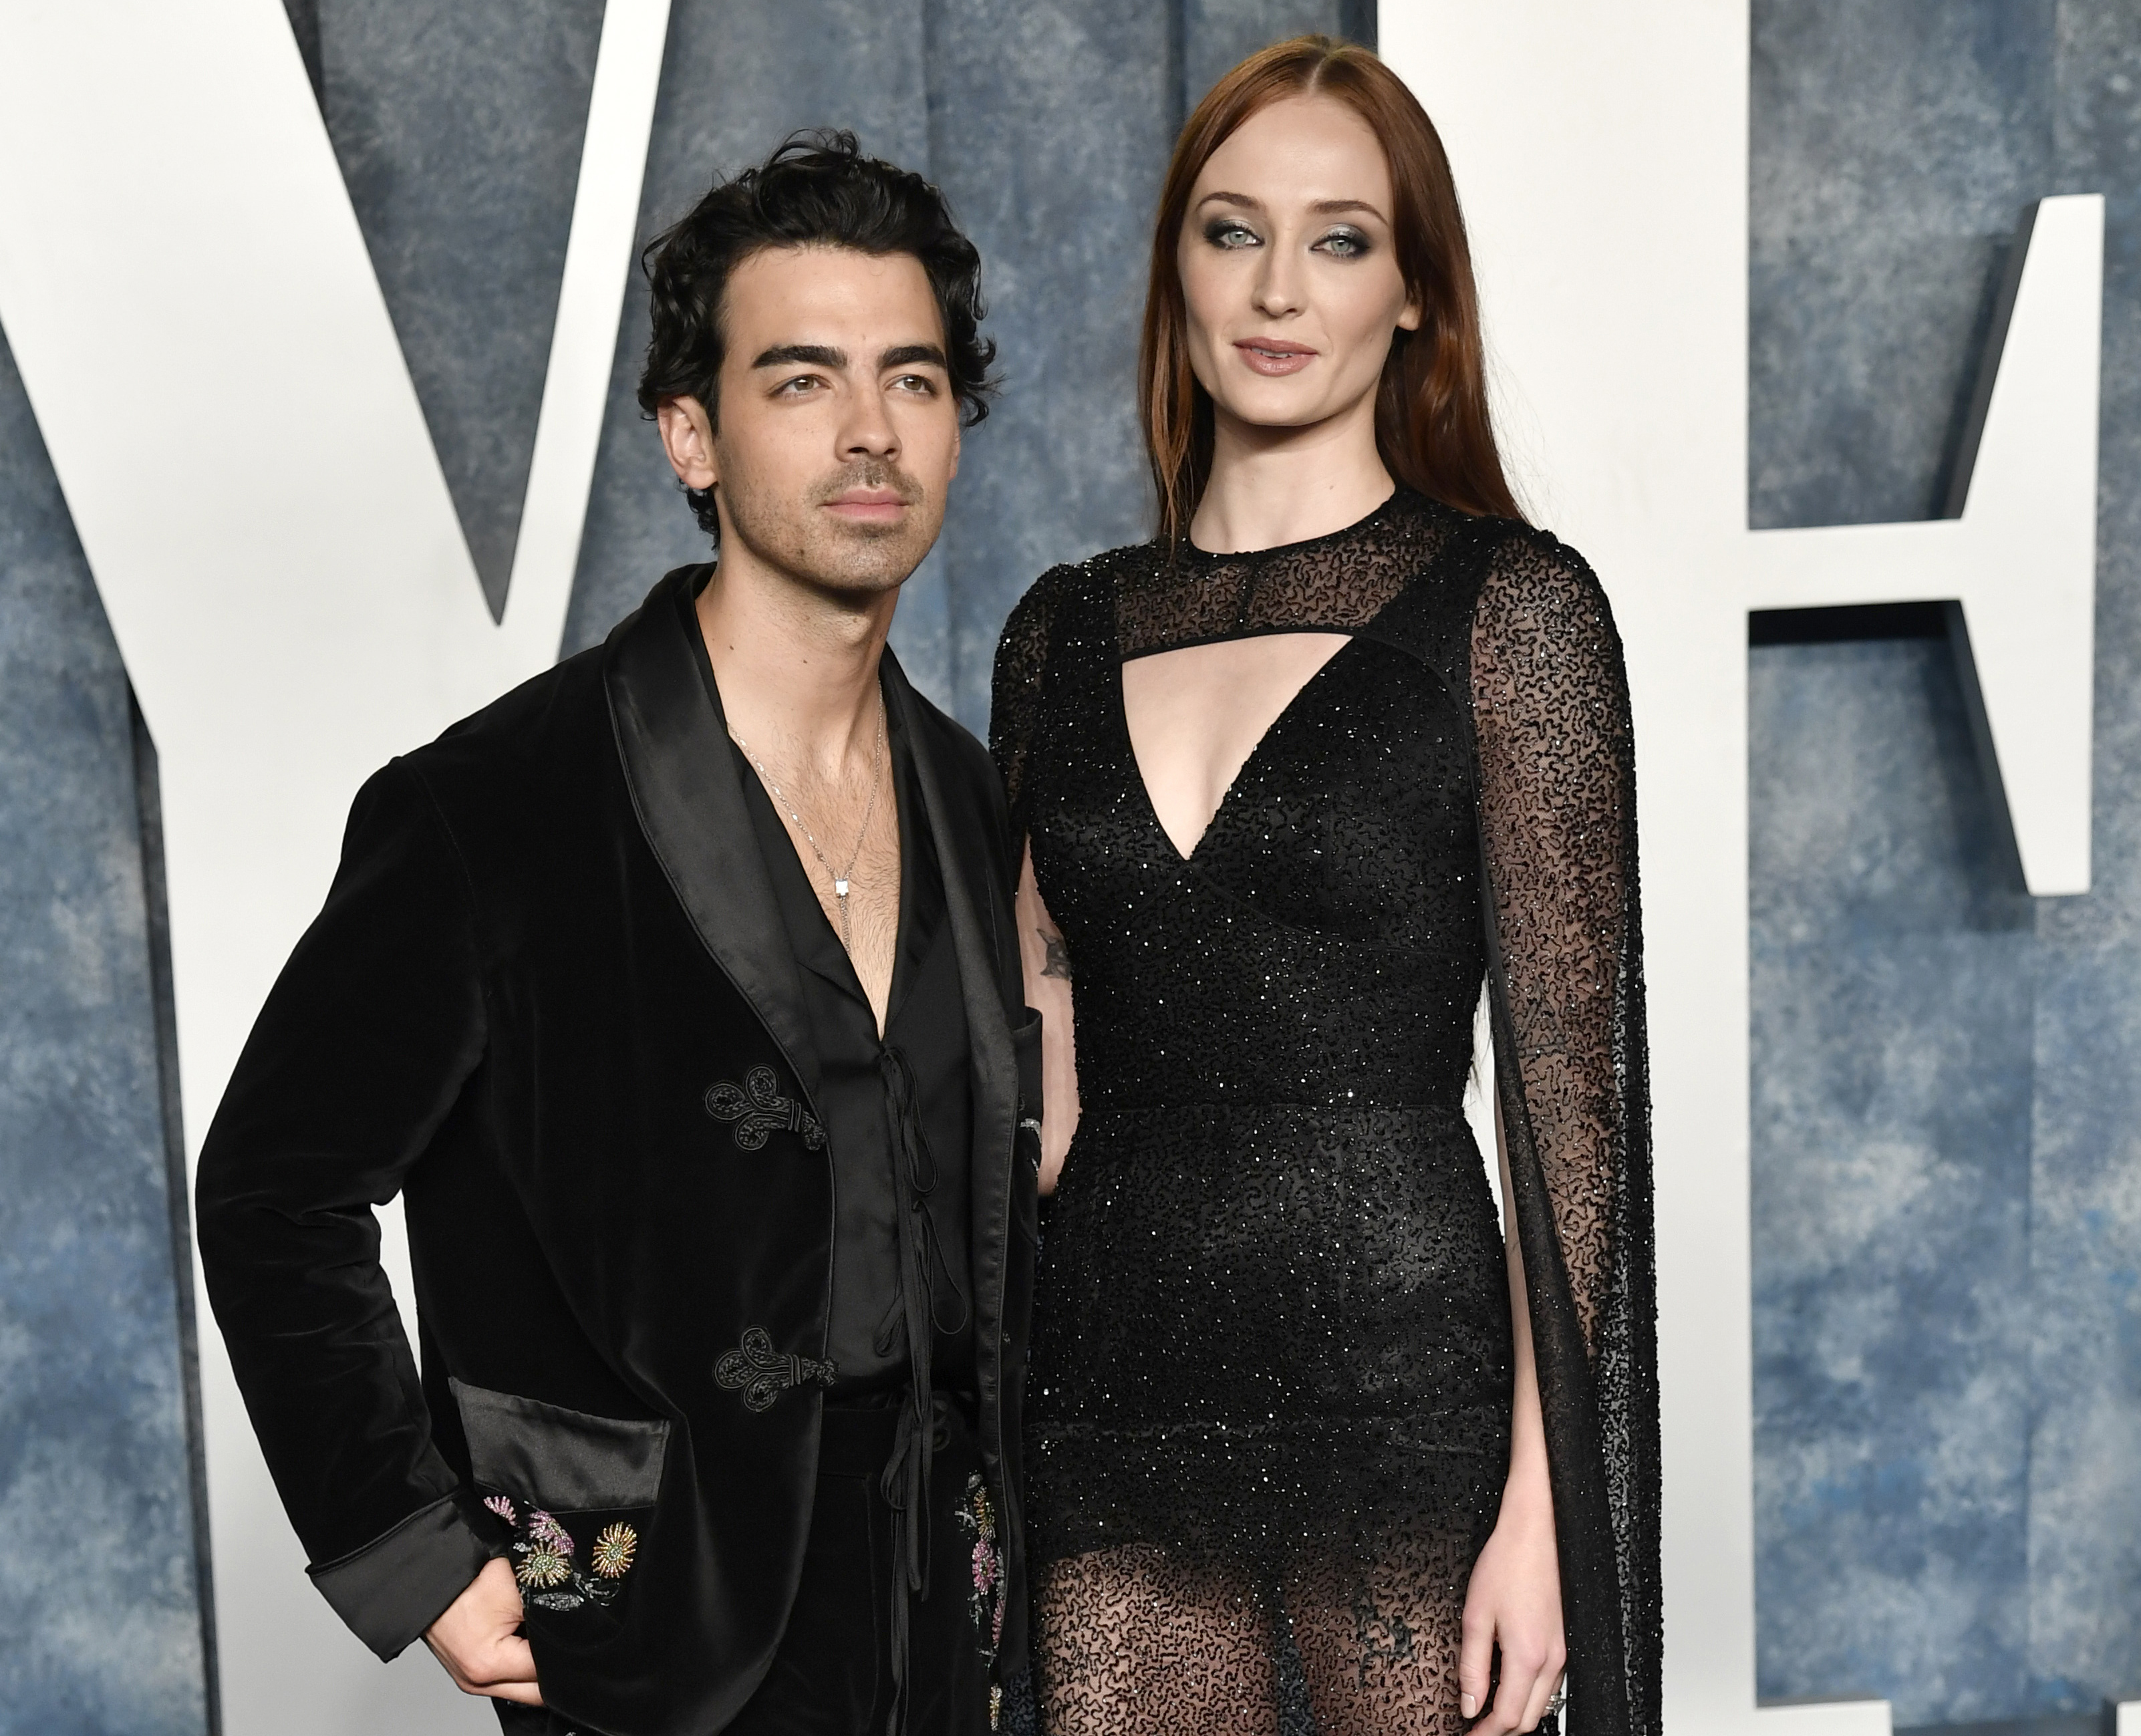 Brianna Parkins The Joe Jonas and Sophie Turner divorce has it all – revenge, Taylor Swift and PR Spin